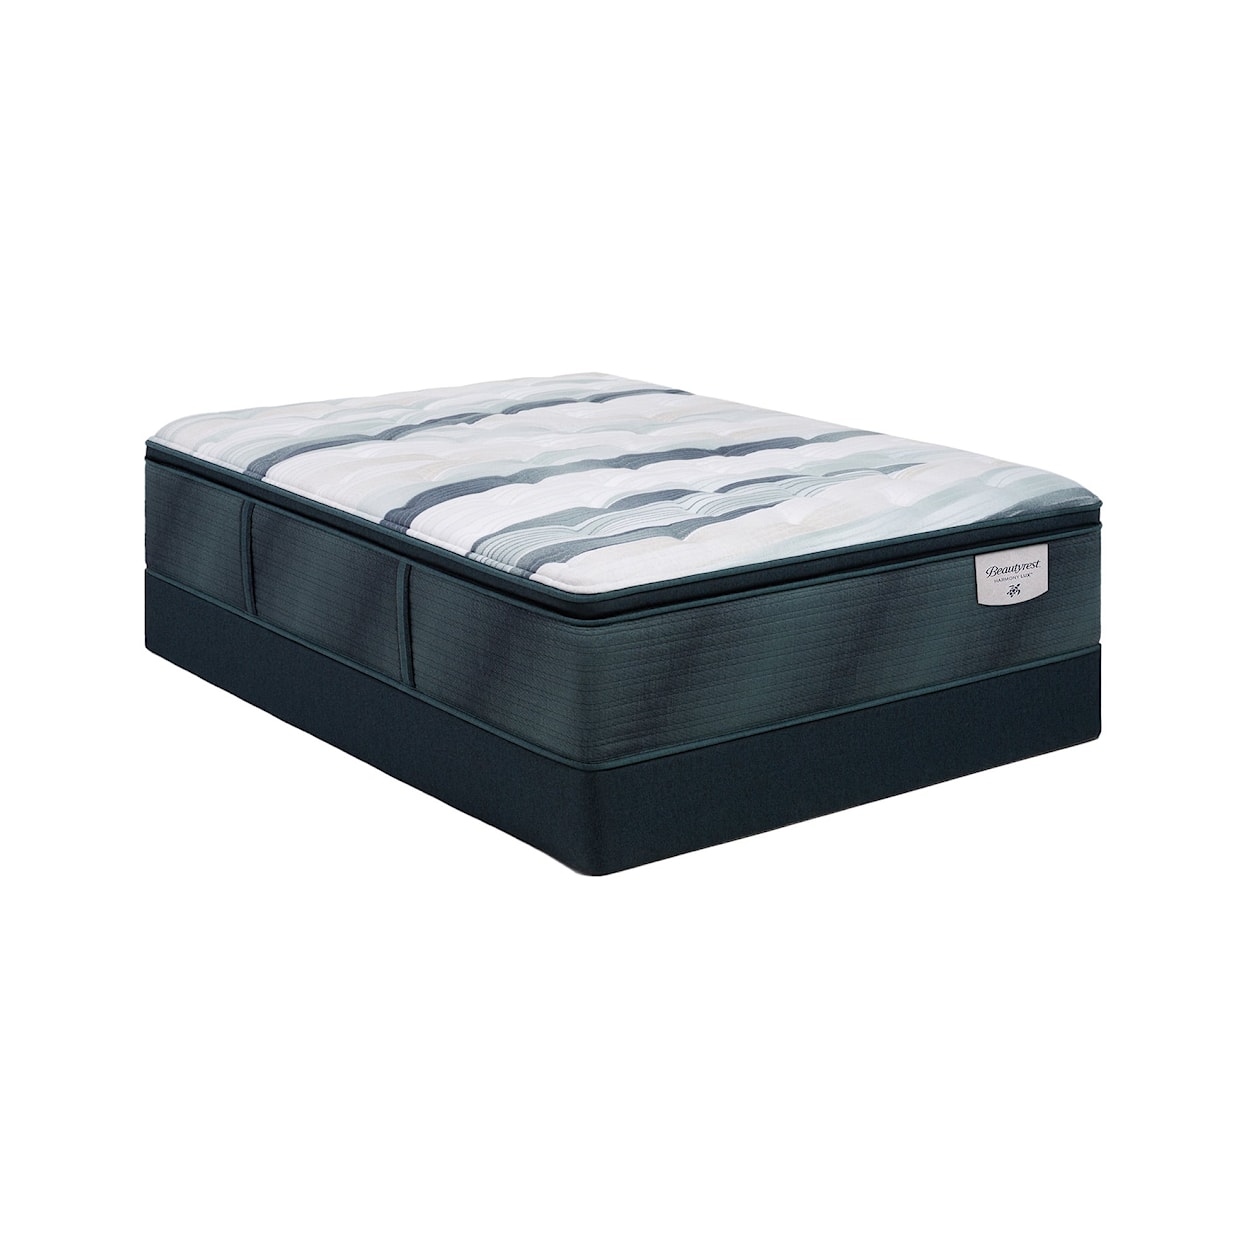 Beautyrest Harmony Lux CORAL ISLAND PL PT Full Mattress